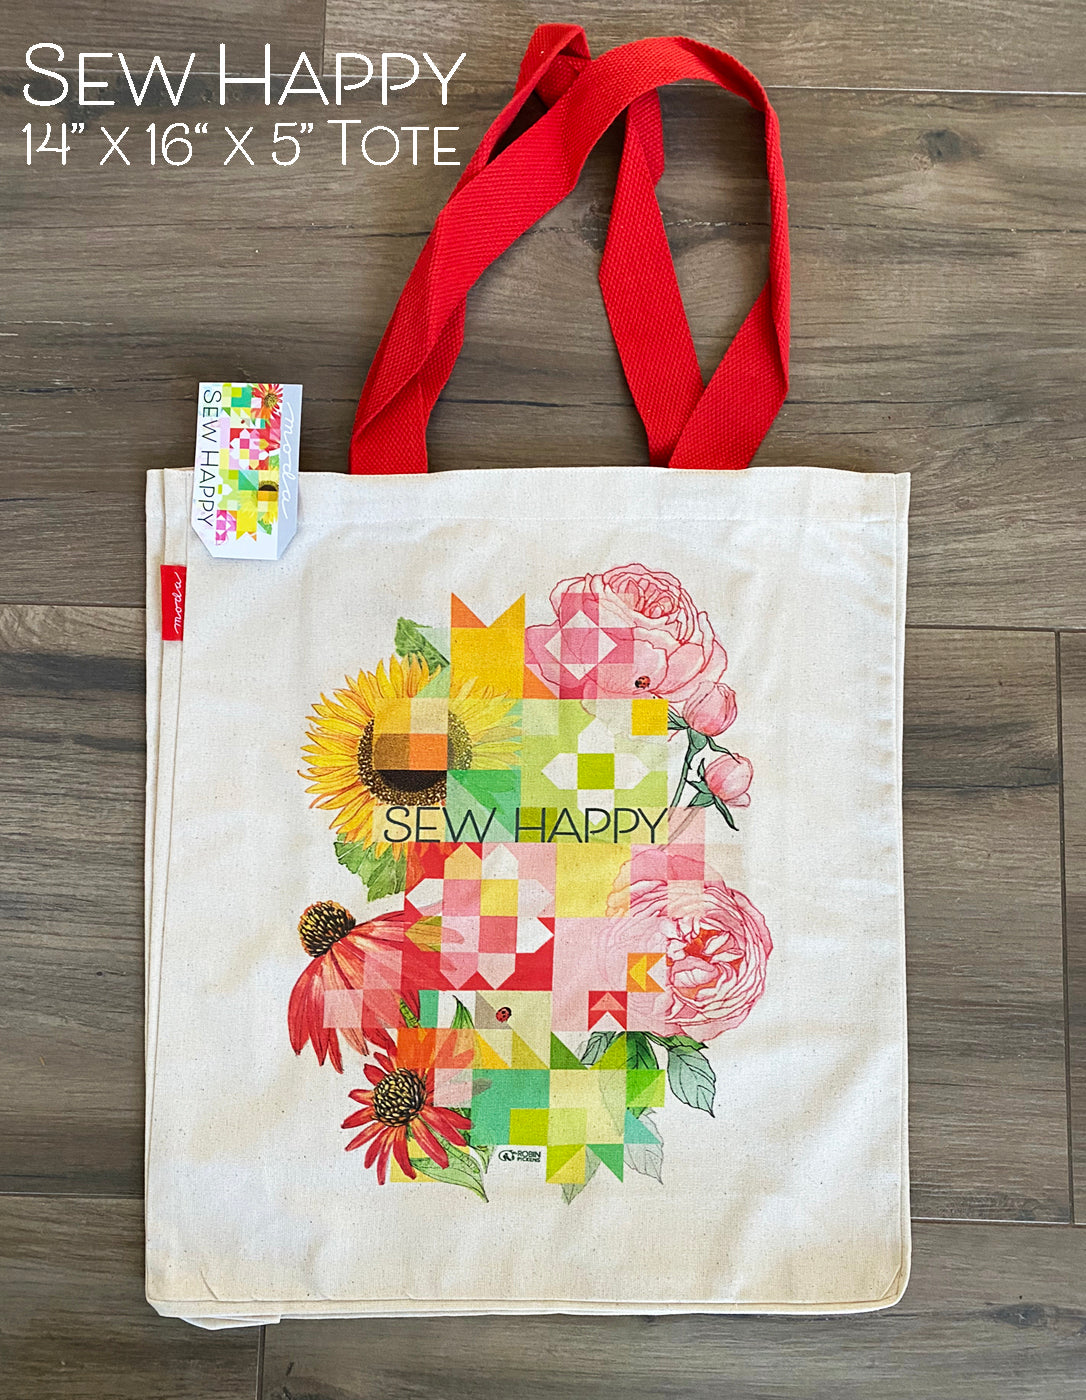 Ready to Decorate - Canvas Tote Bag 11x14